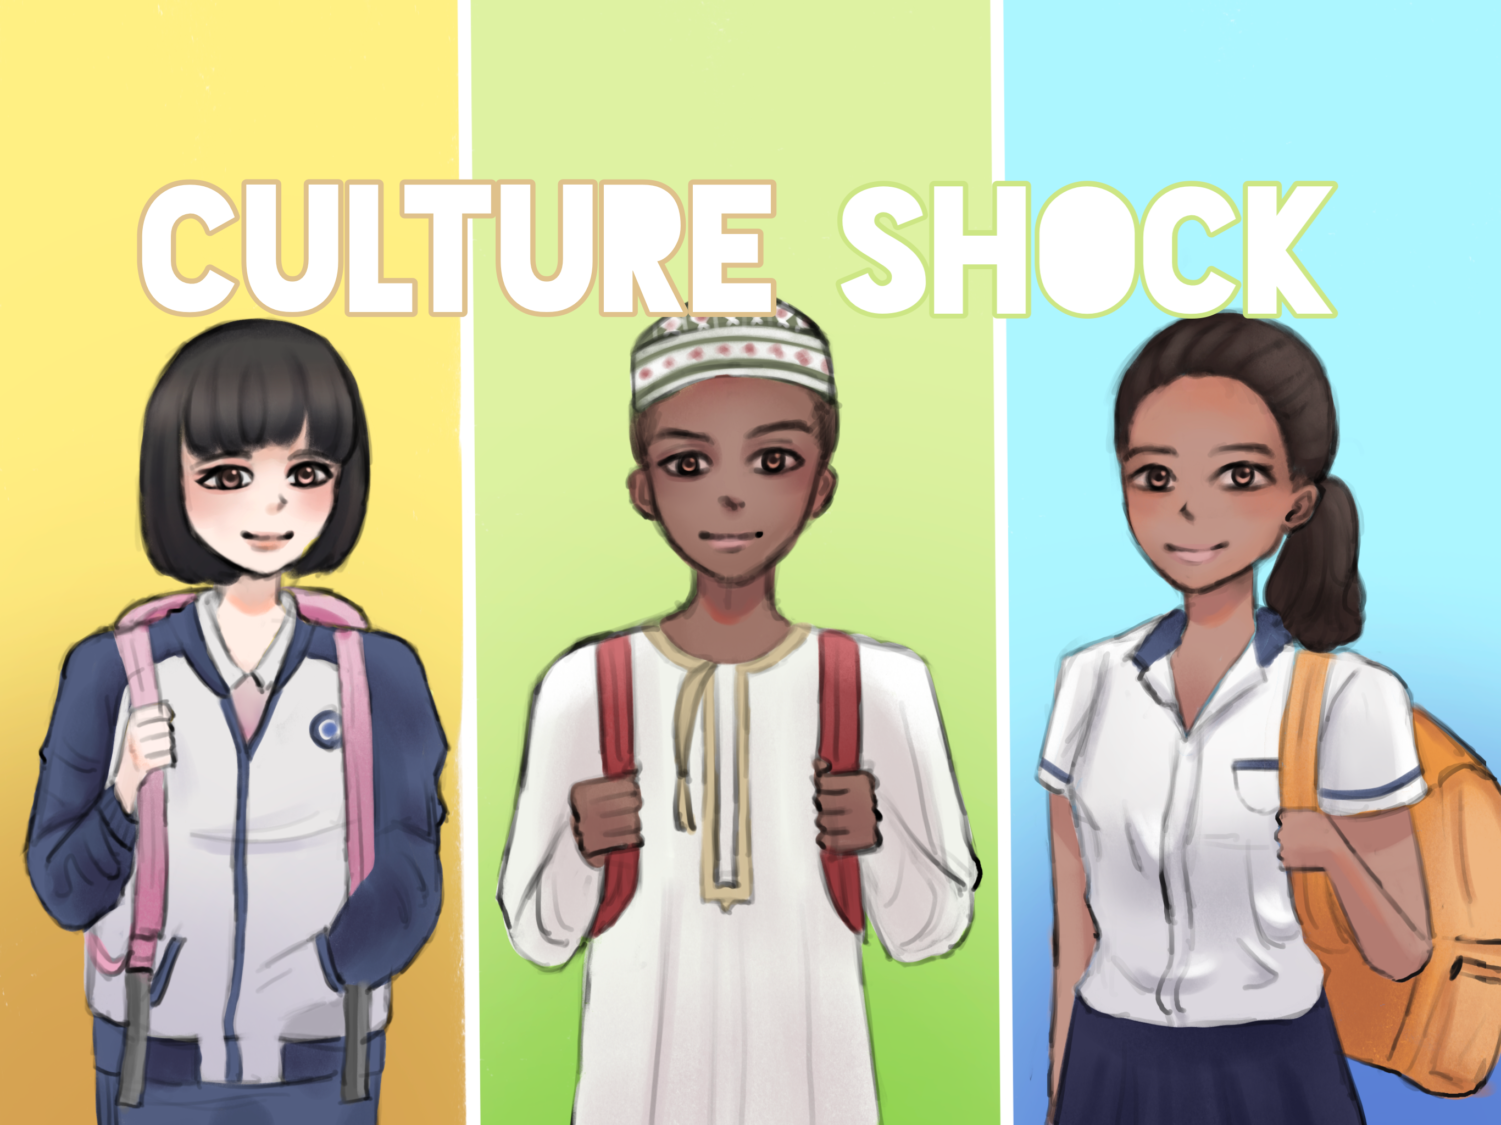 Culture shock is a feeling of disorientation many people feel when experiencing an entirely new way of life. Many international students experience culture shock following their transition into a different environment.